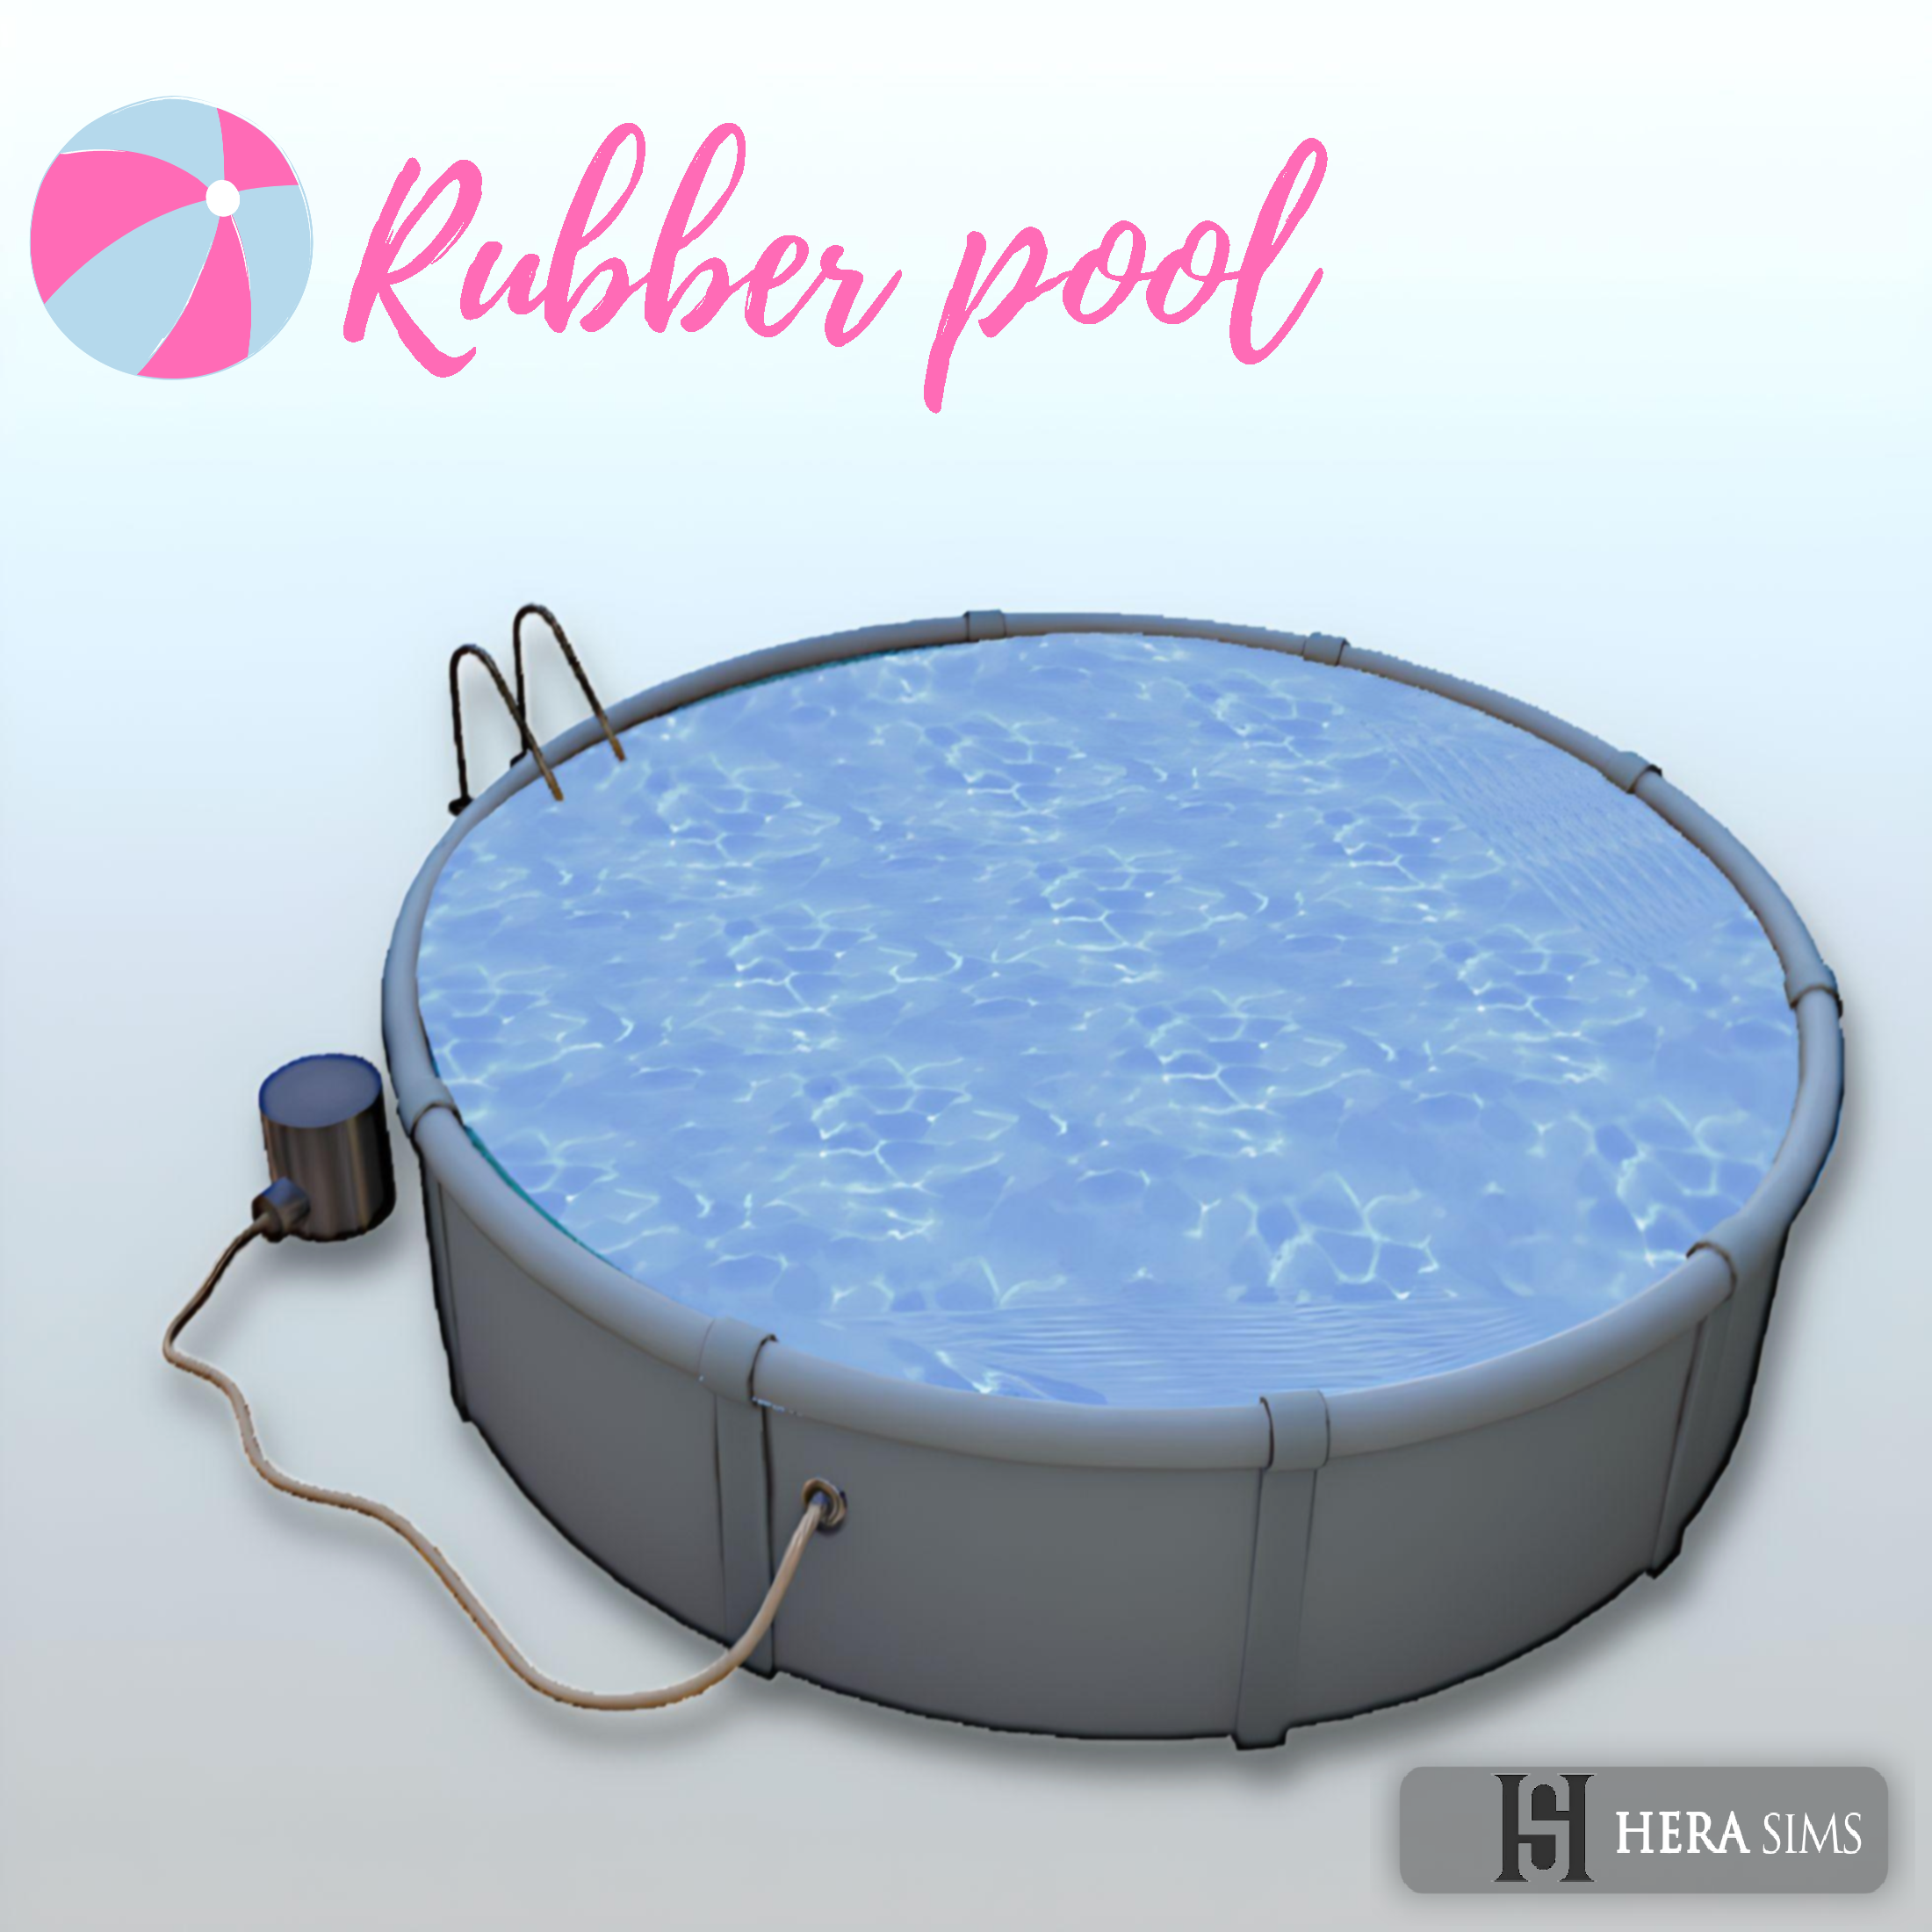 Functional rubber pool project avatar